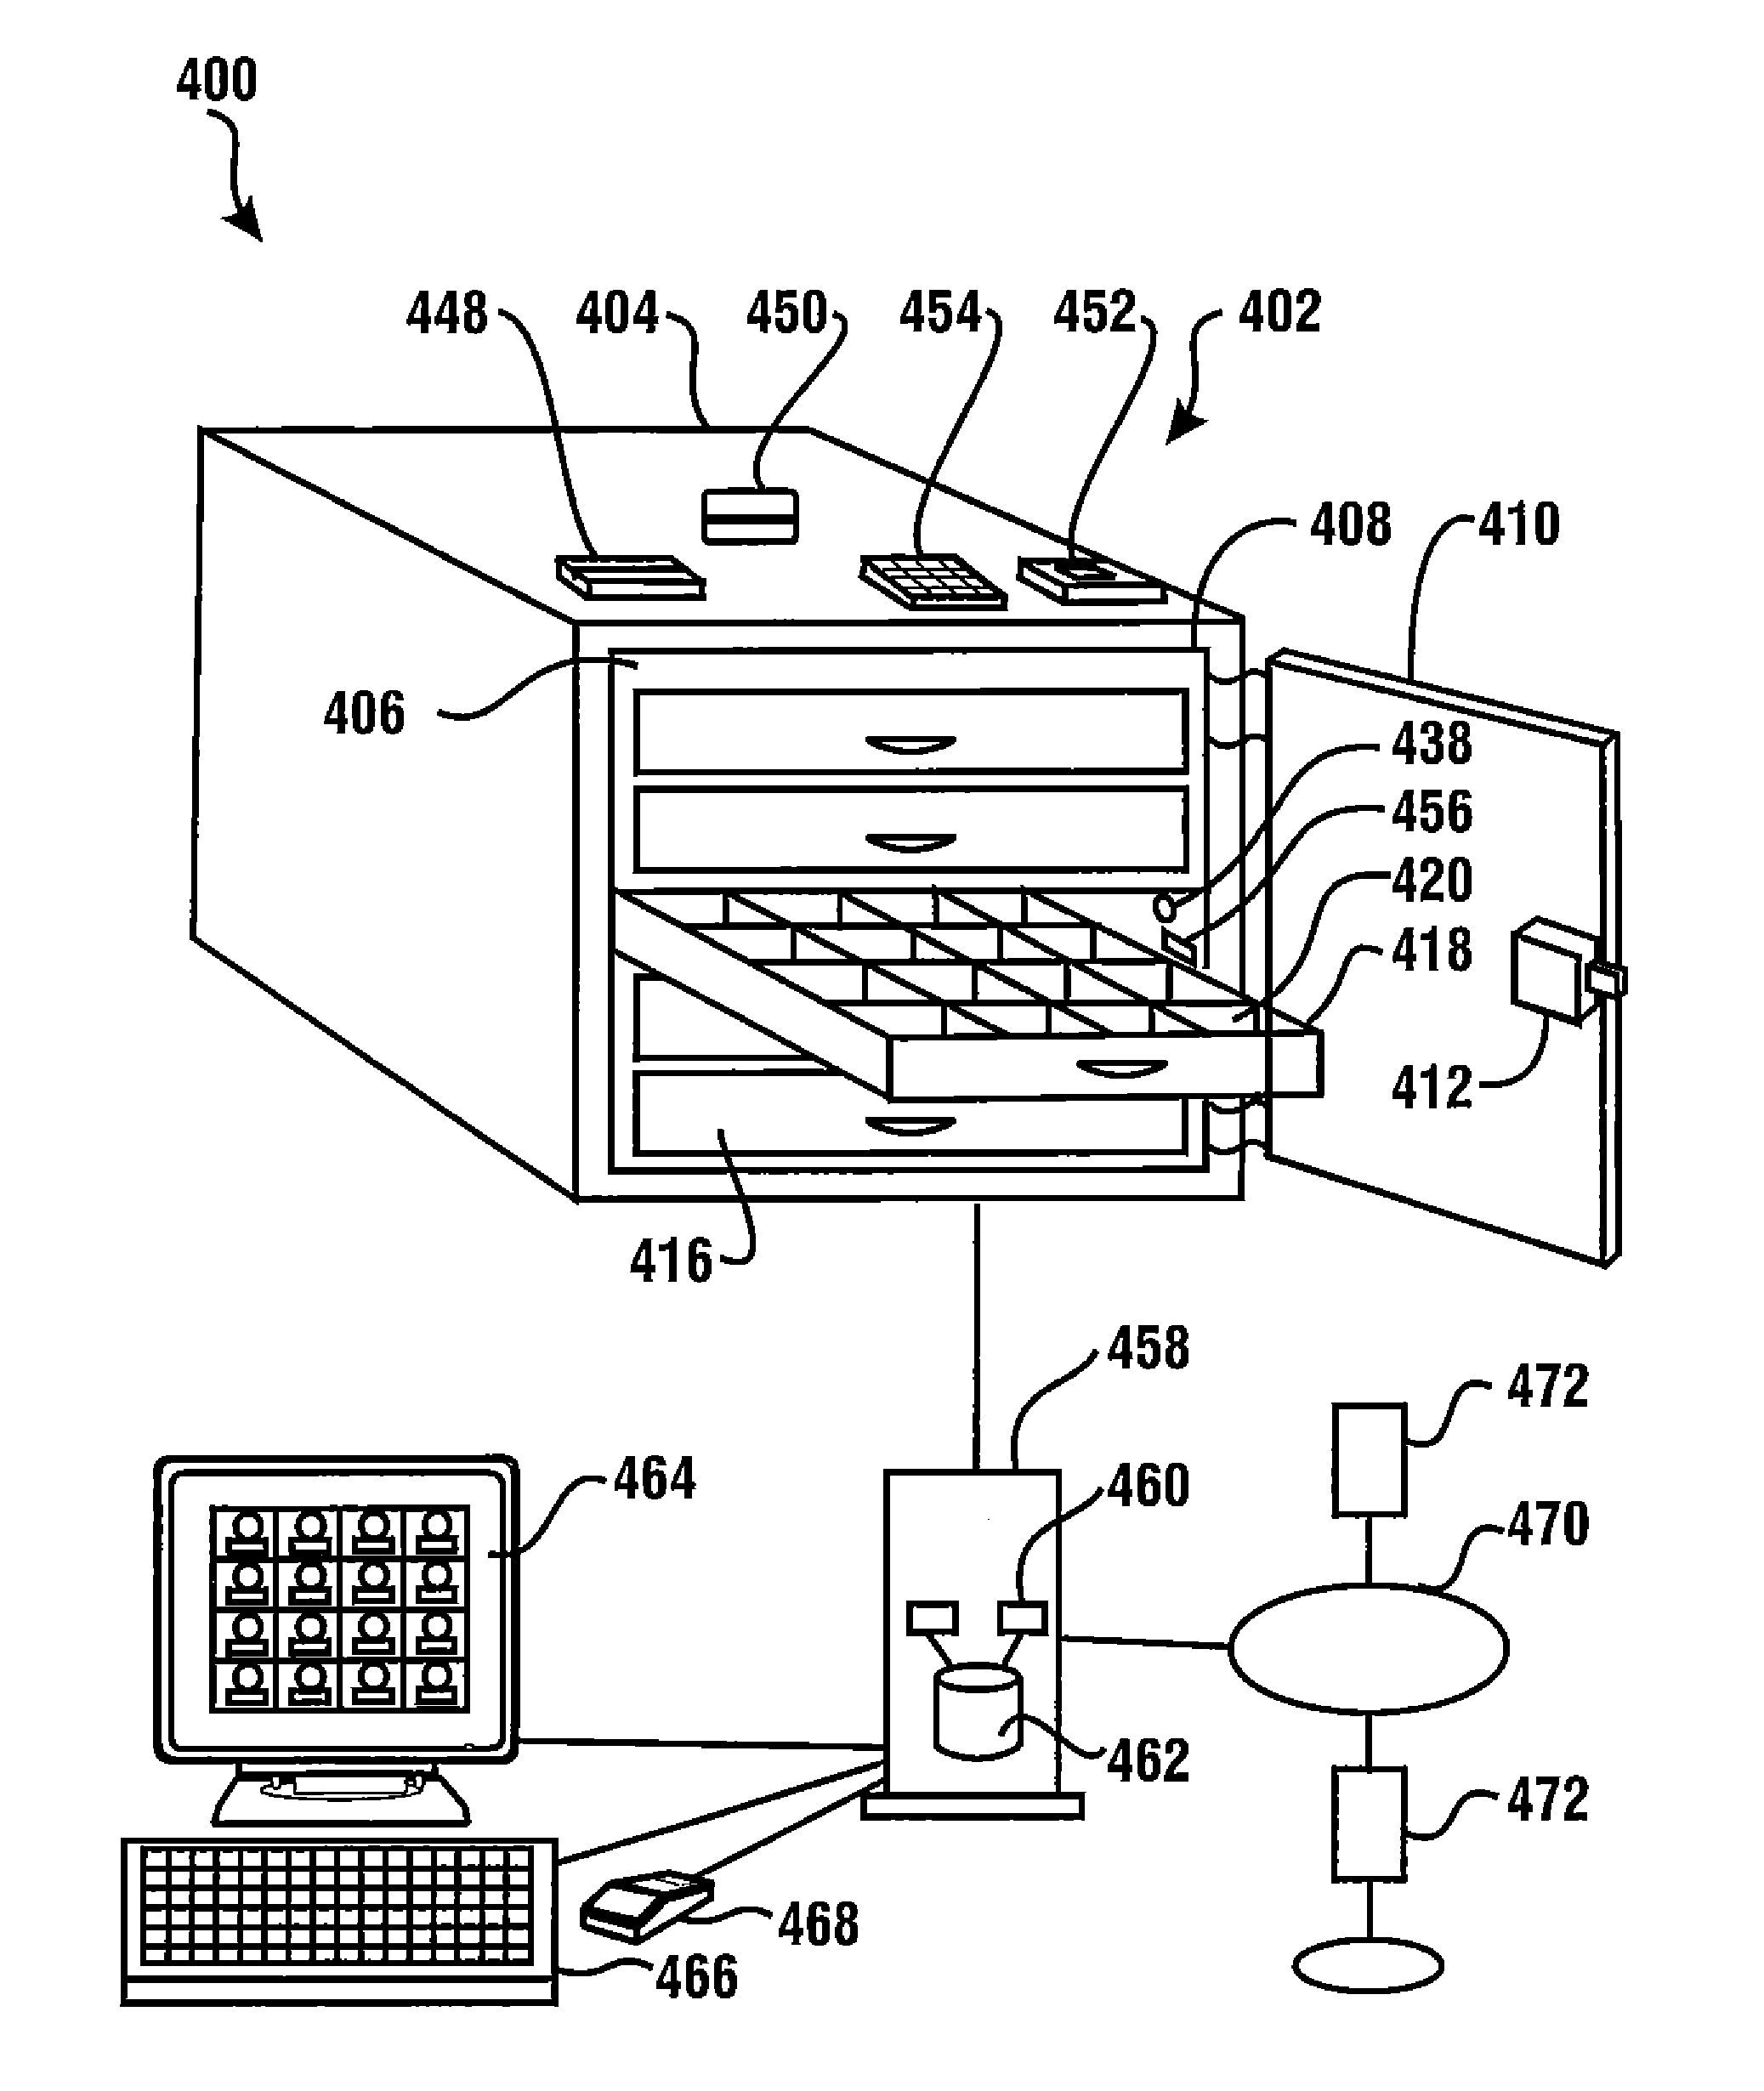 Systems controlled by data bearing records for maintaining inventory data